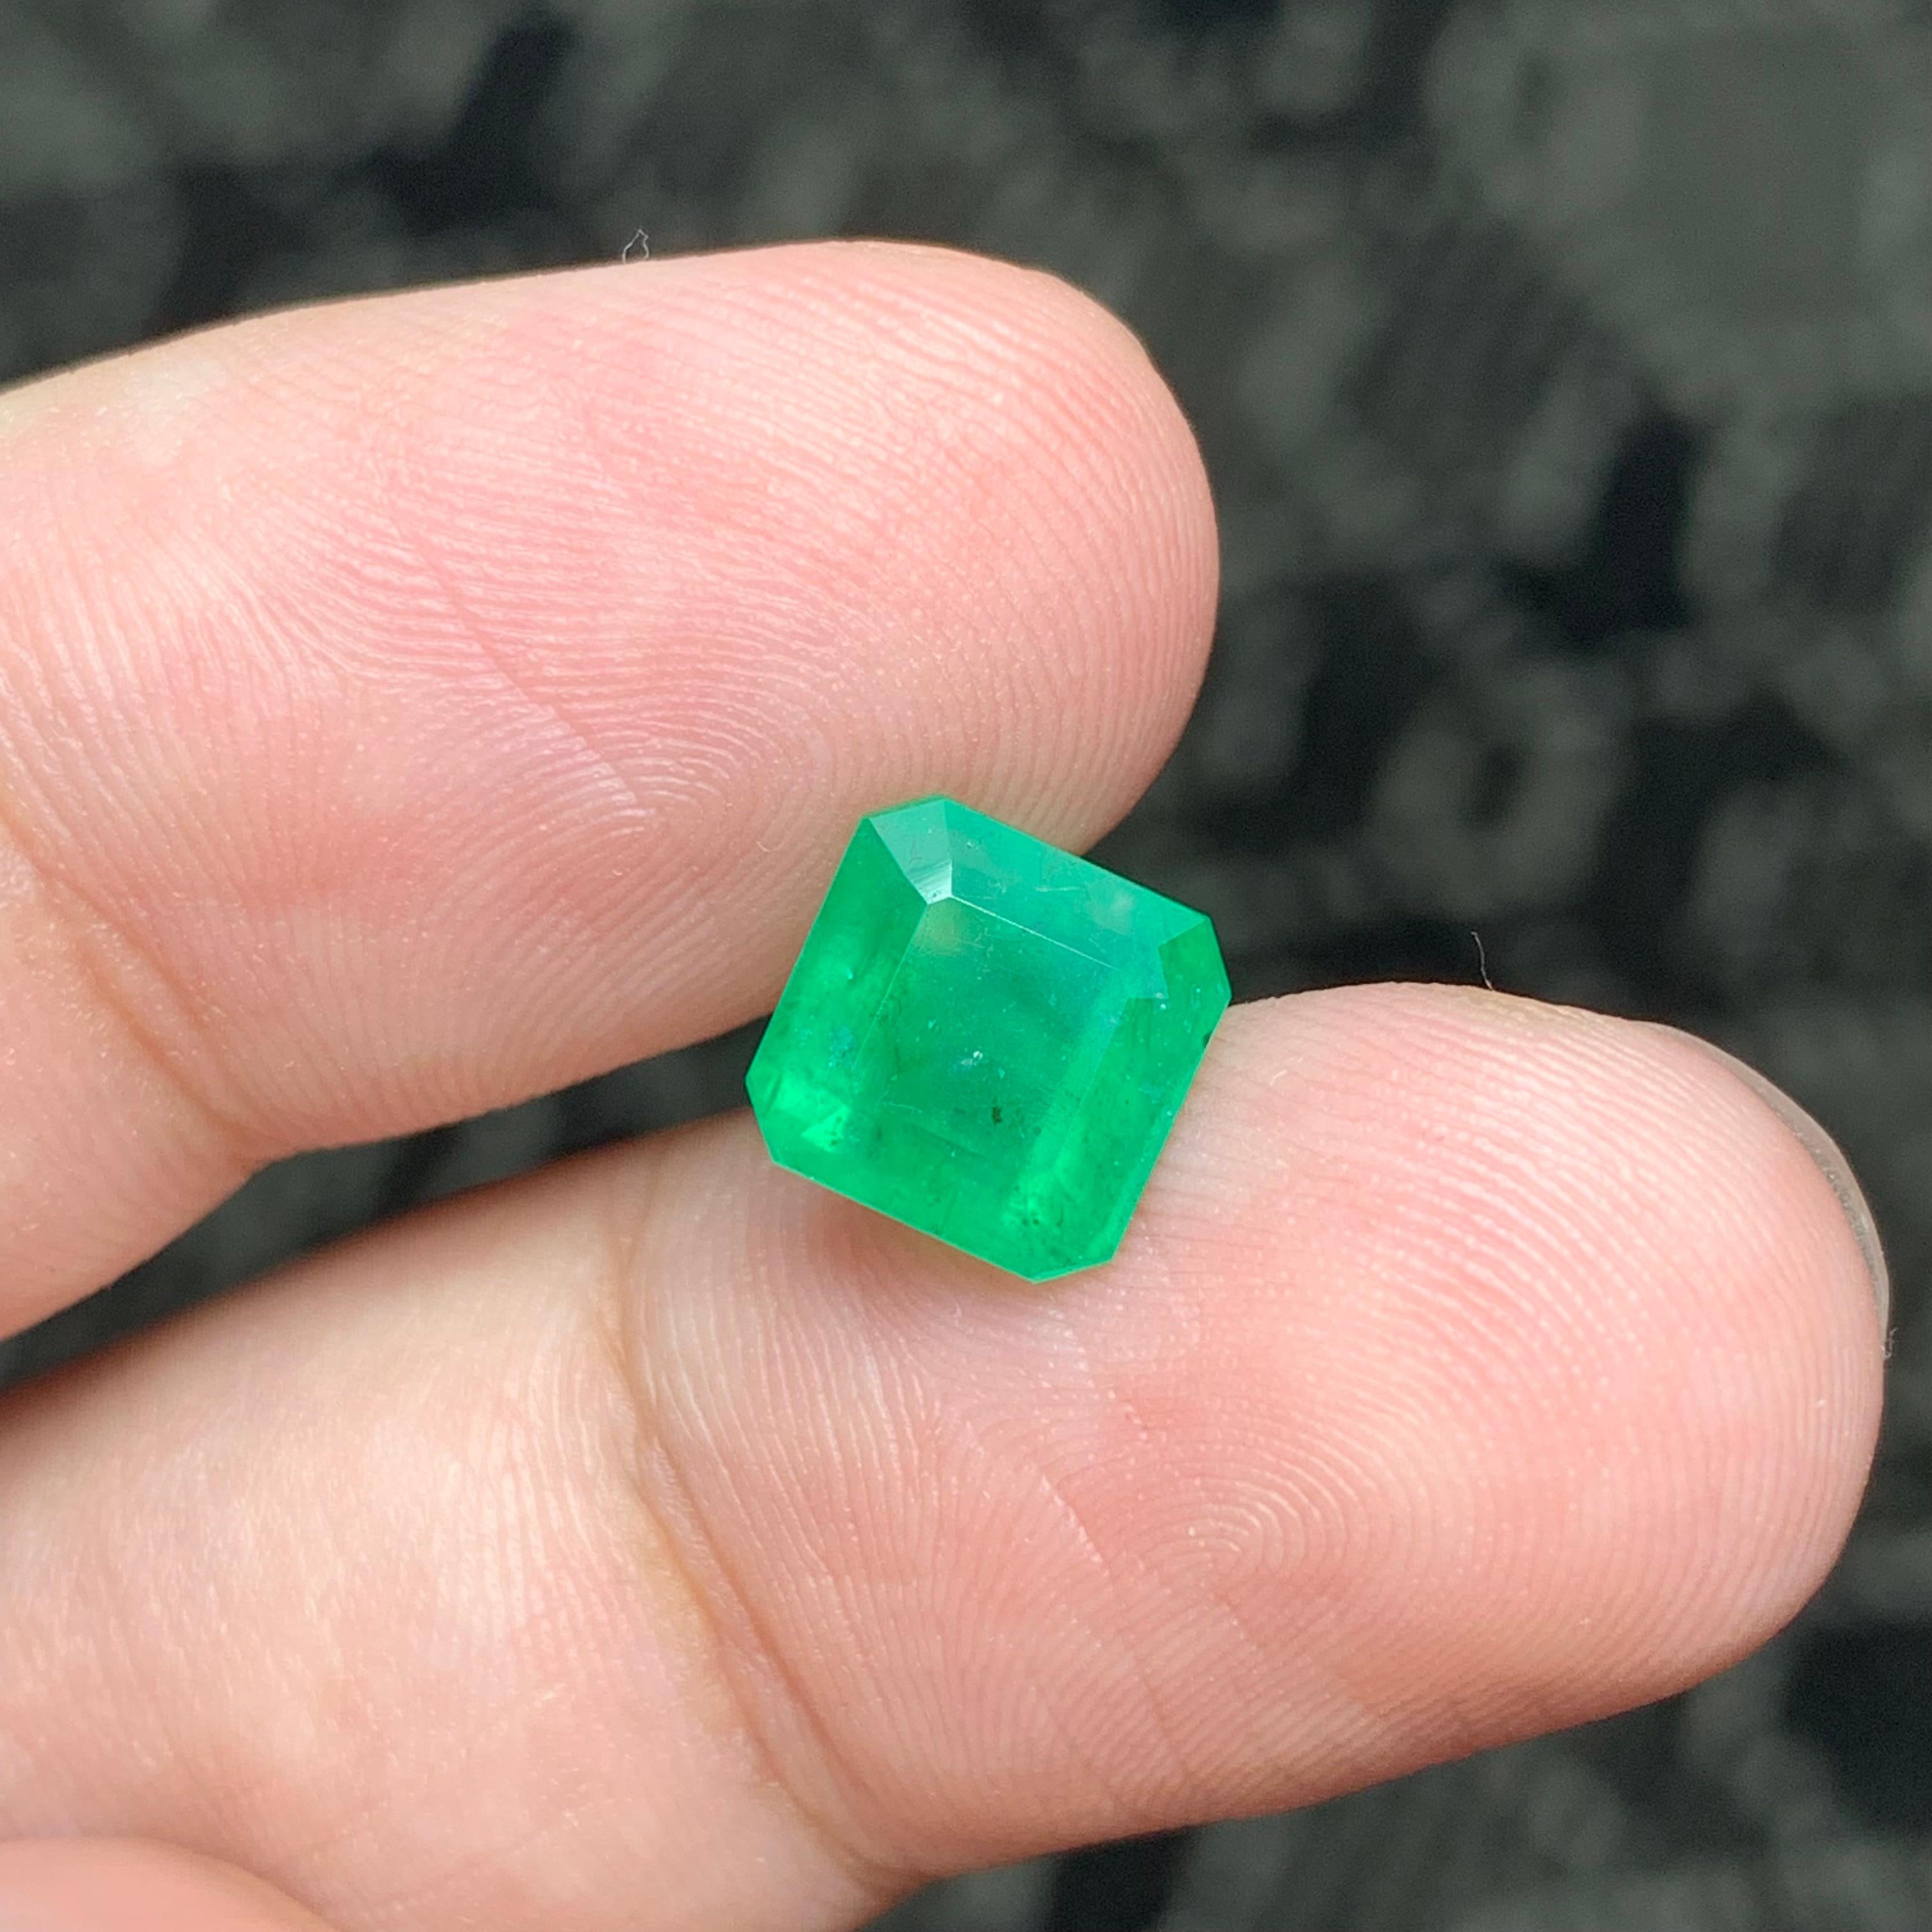 Loose Emerald
Weight: 2.80 Carats
Dimensions: 8.1 x 8 x 5.6 Mm
Origin: Swat Pakistan
Shape: Square 
Color: Green
Treatment: Non
Certificate: On Demand

The Swat Emerald, also known as the Mingora Emerald, is a rare and highly prized gemstone